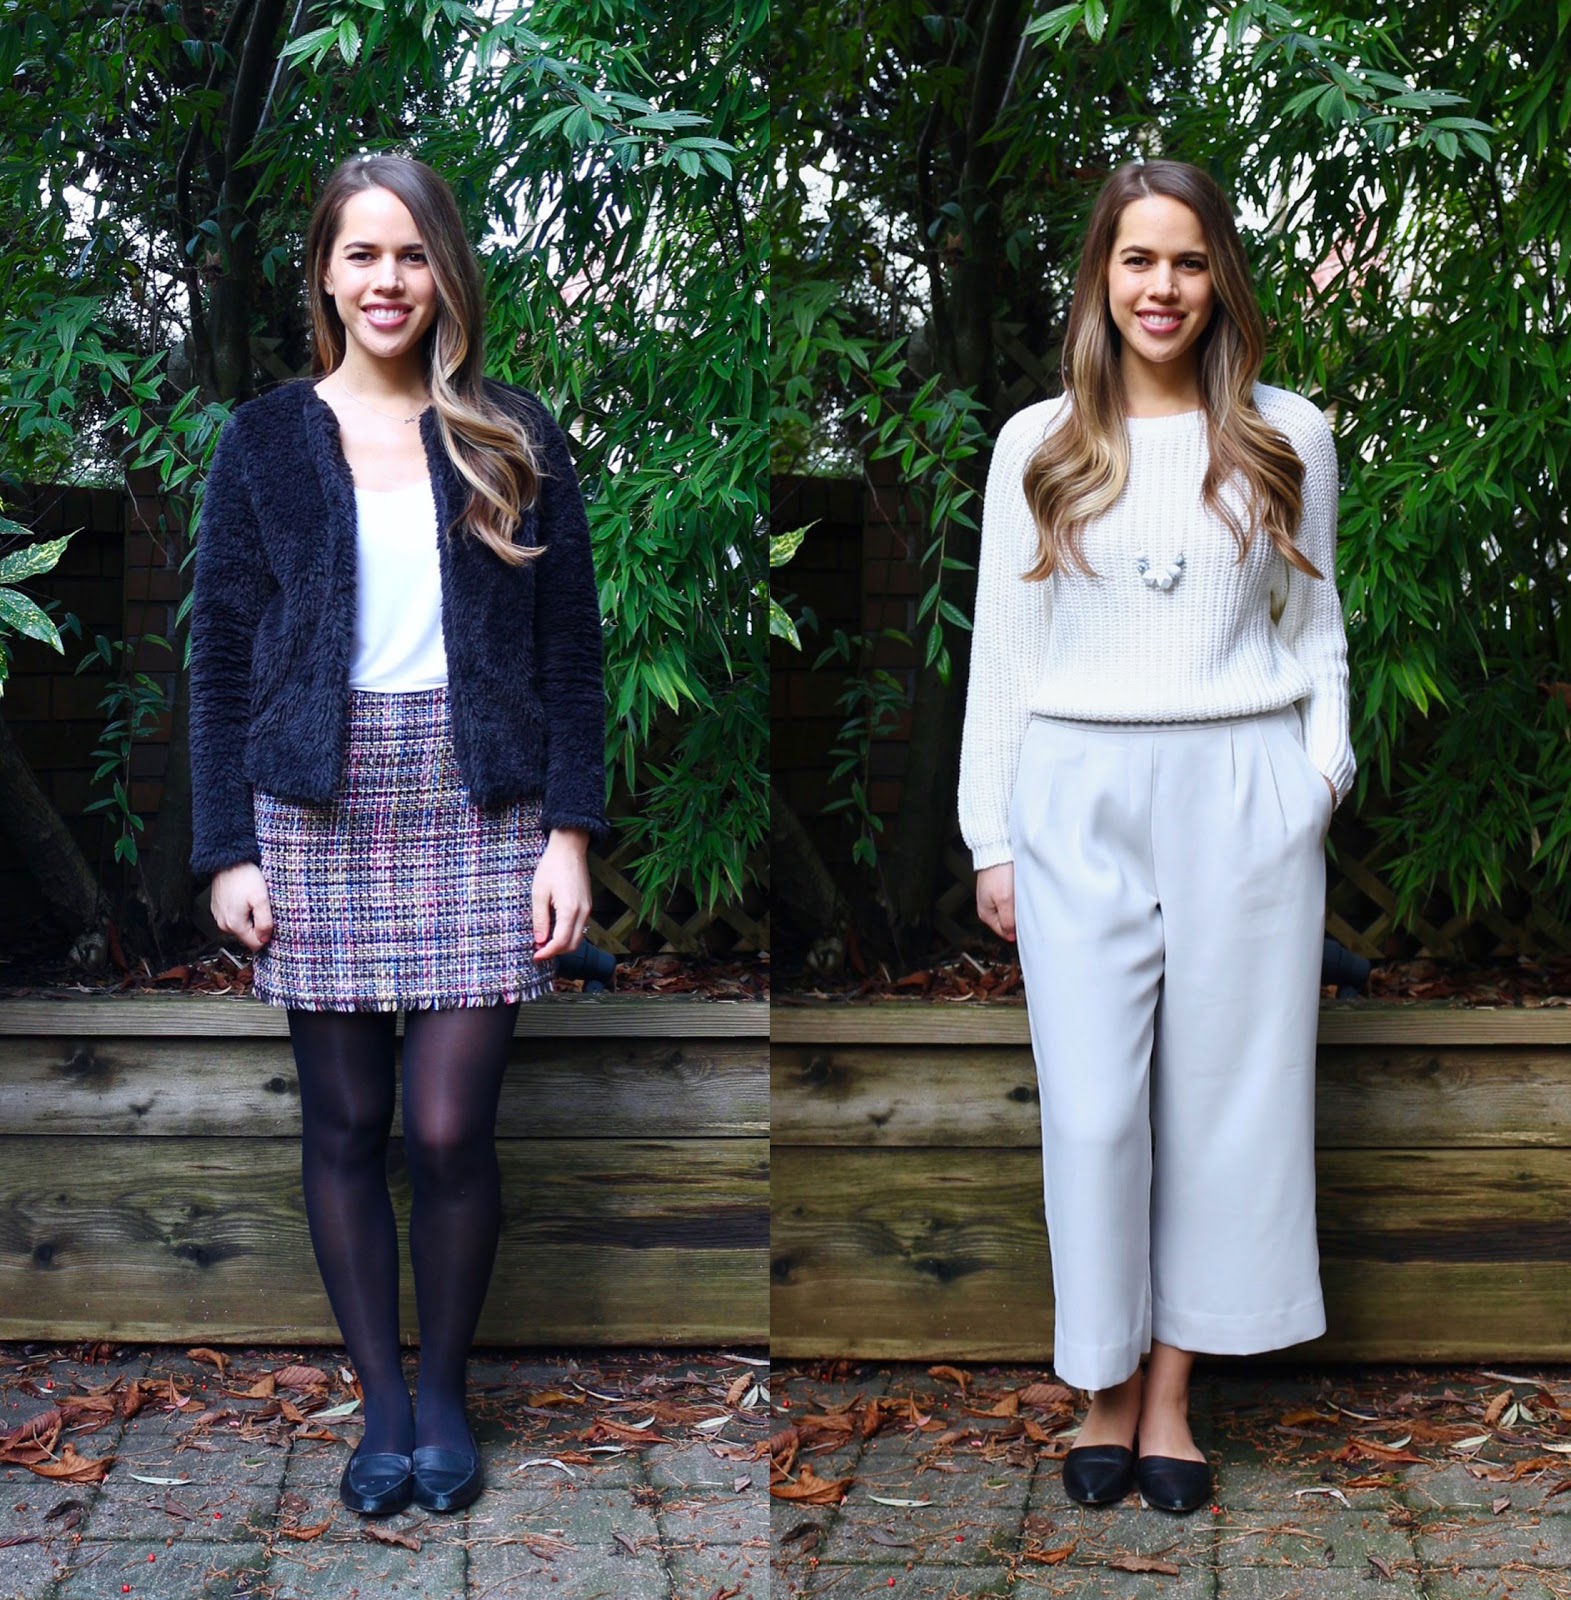 Jules in Flats - December Outfits (Business Casual Winter Workwear on a Budget)